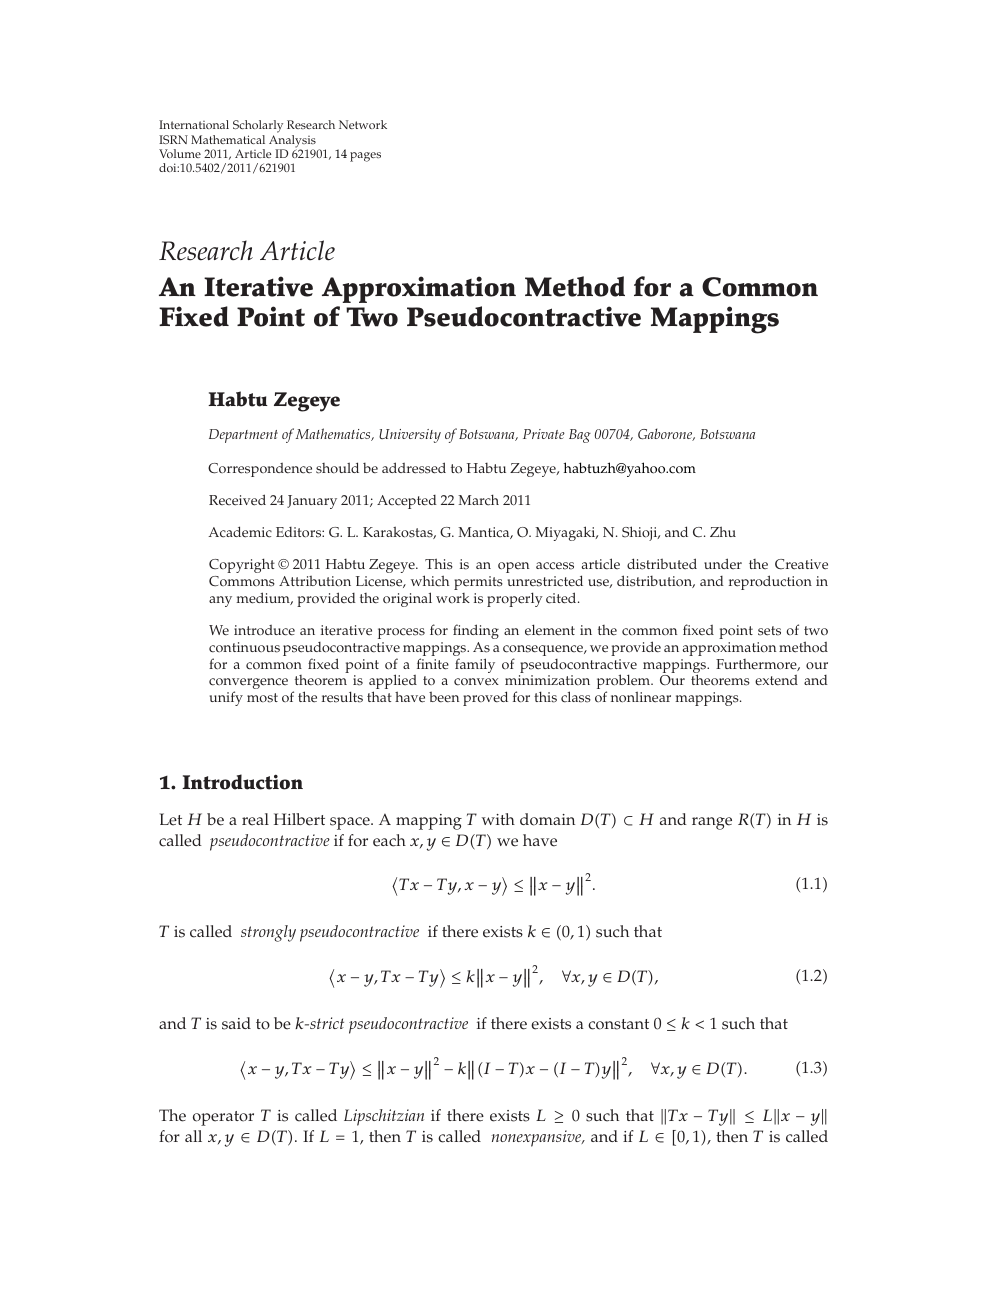 An Iterative Approximation Method For A Common Fixed Point Of Two Pseudocontractive Mappings Topic Of Research Paper In Mathematics Download Scholarly Article Pdf And Read For Free On Cyberleninka Open Science